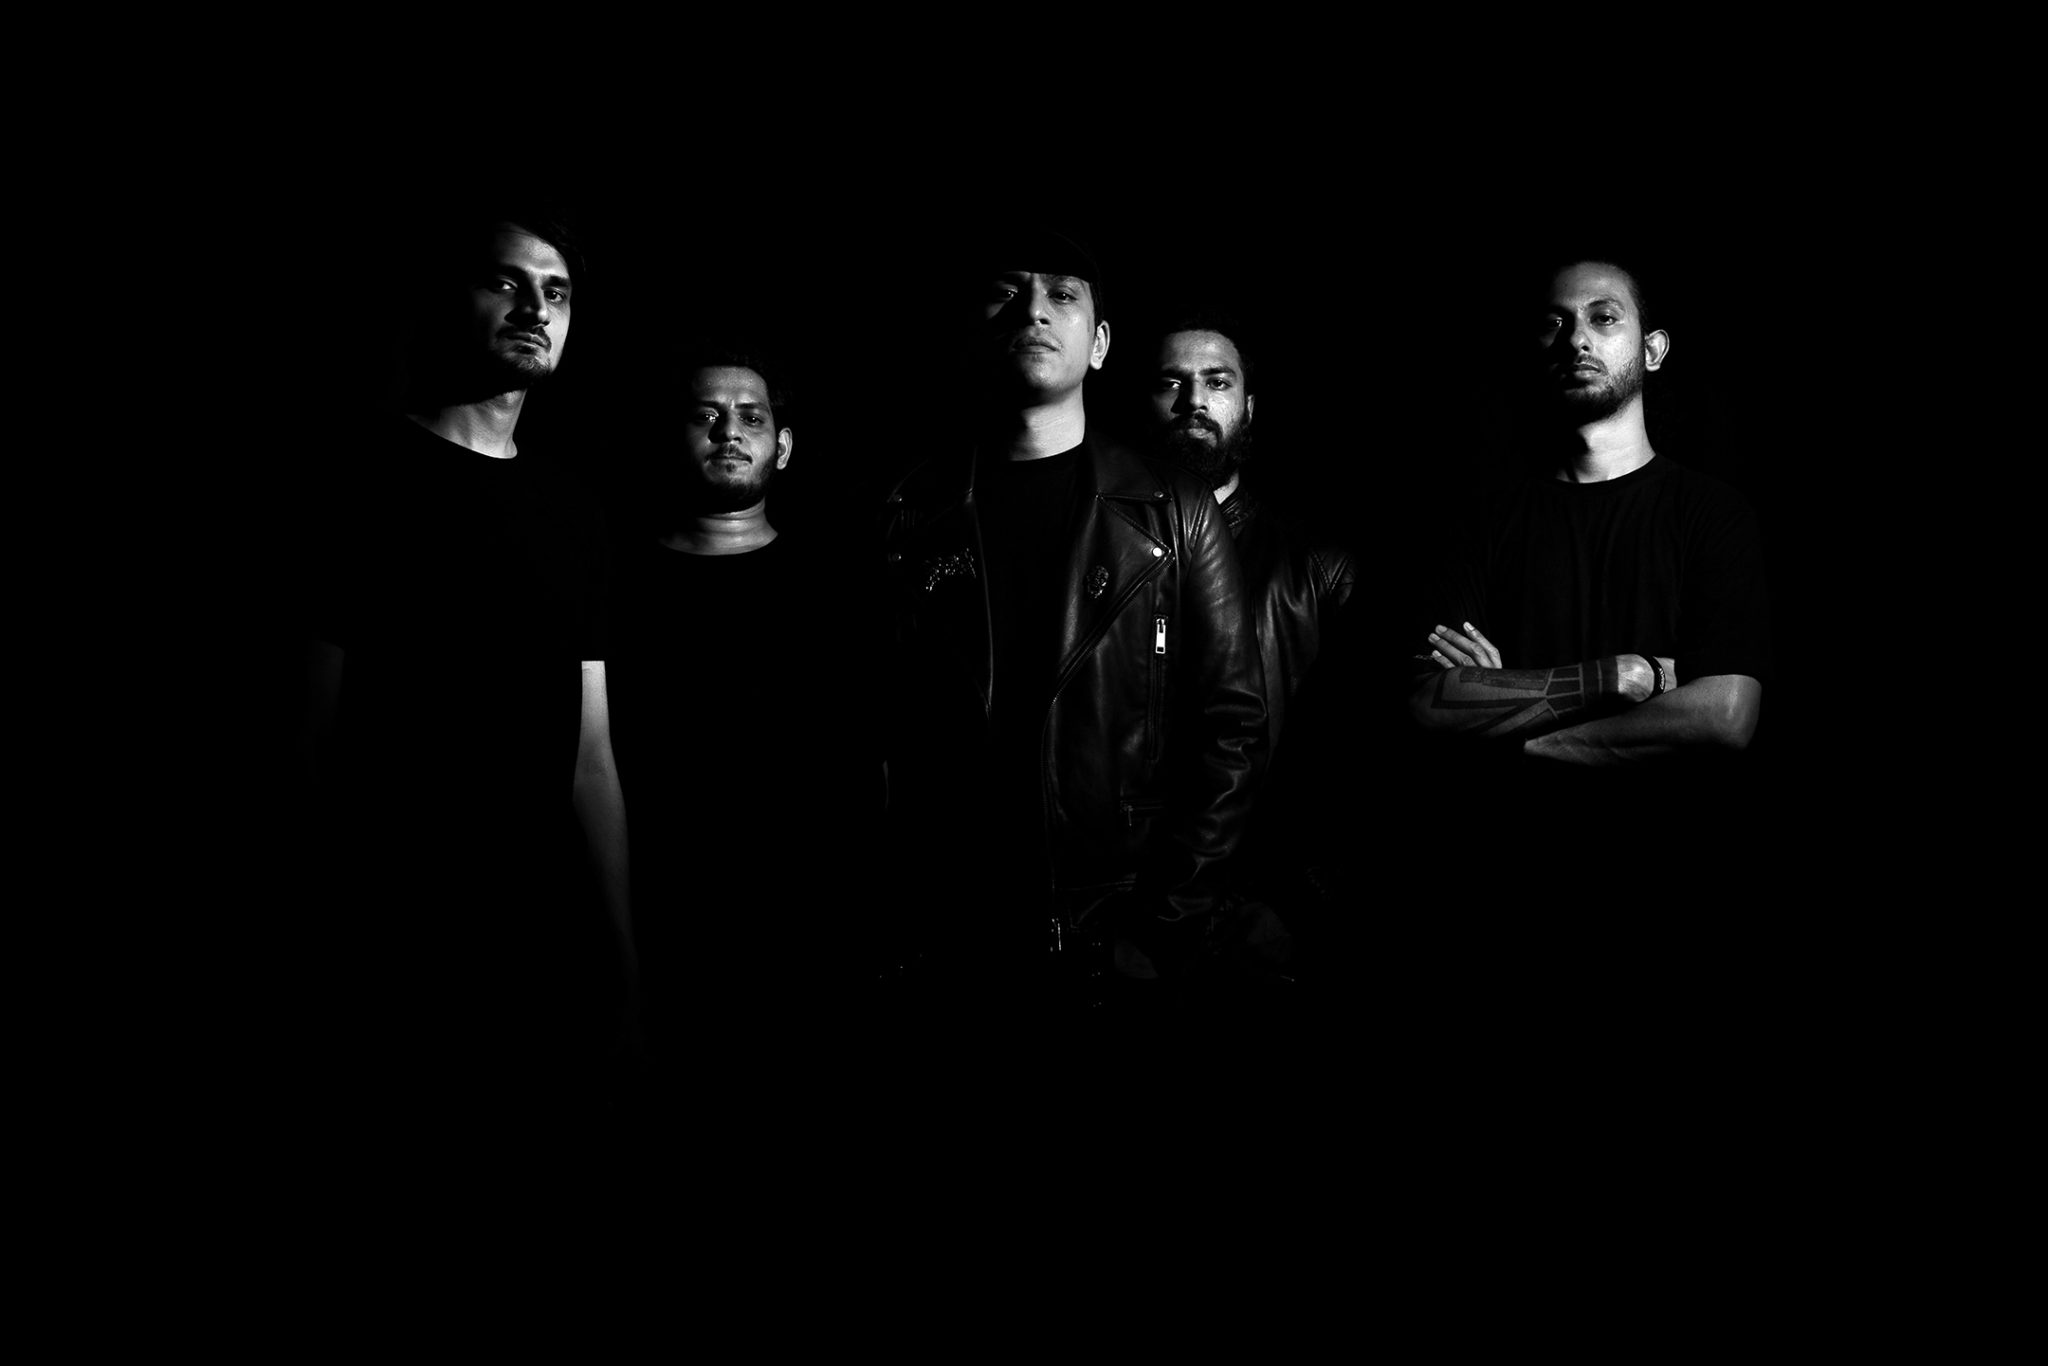 GODLESS: Invisible Oranges Hosts Exclusive States Of Chaos Album Stream; Debut LP From Indian Death Metal Quintet To See Release This Friday Surrounded By Launch Parties/Performances